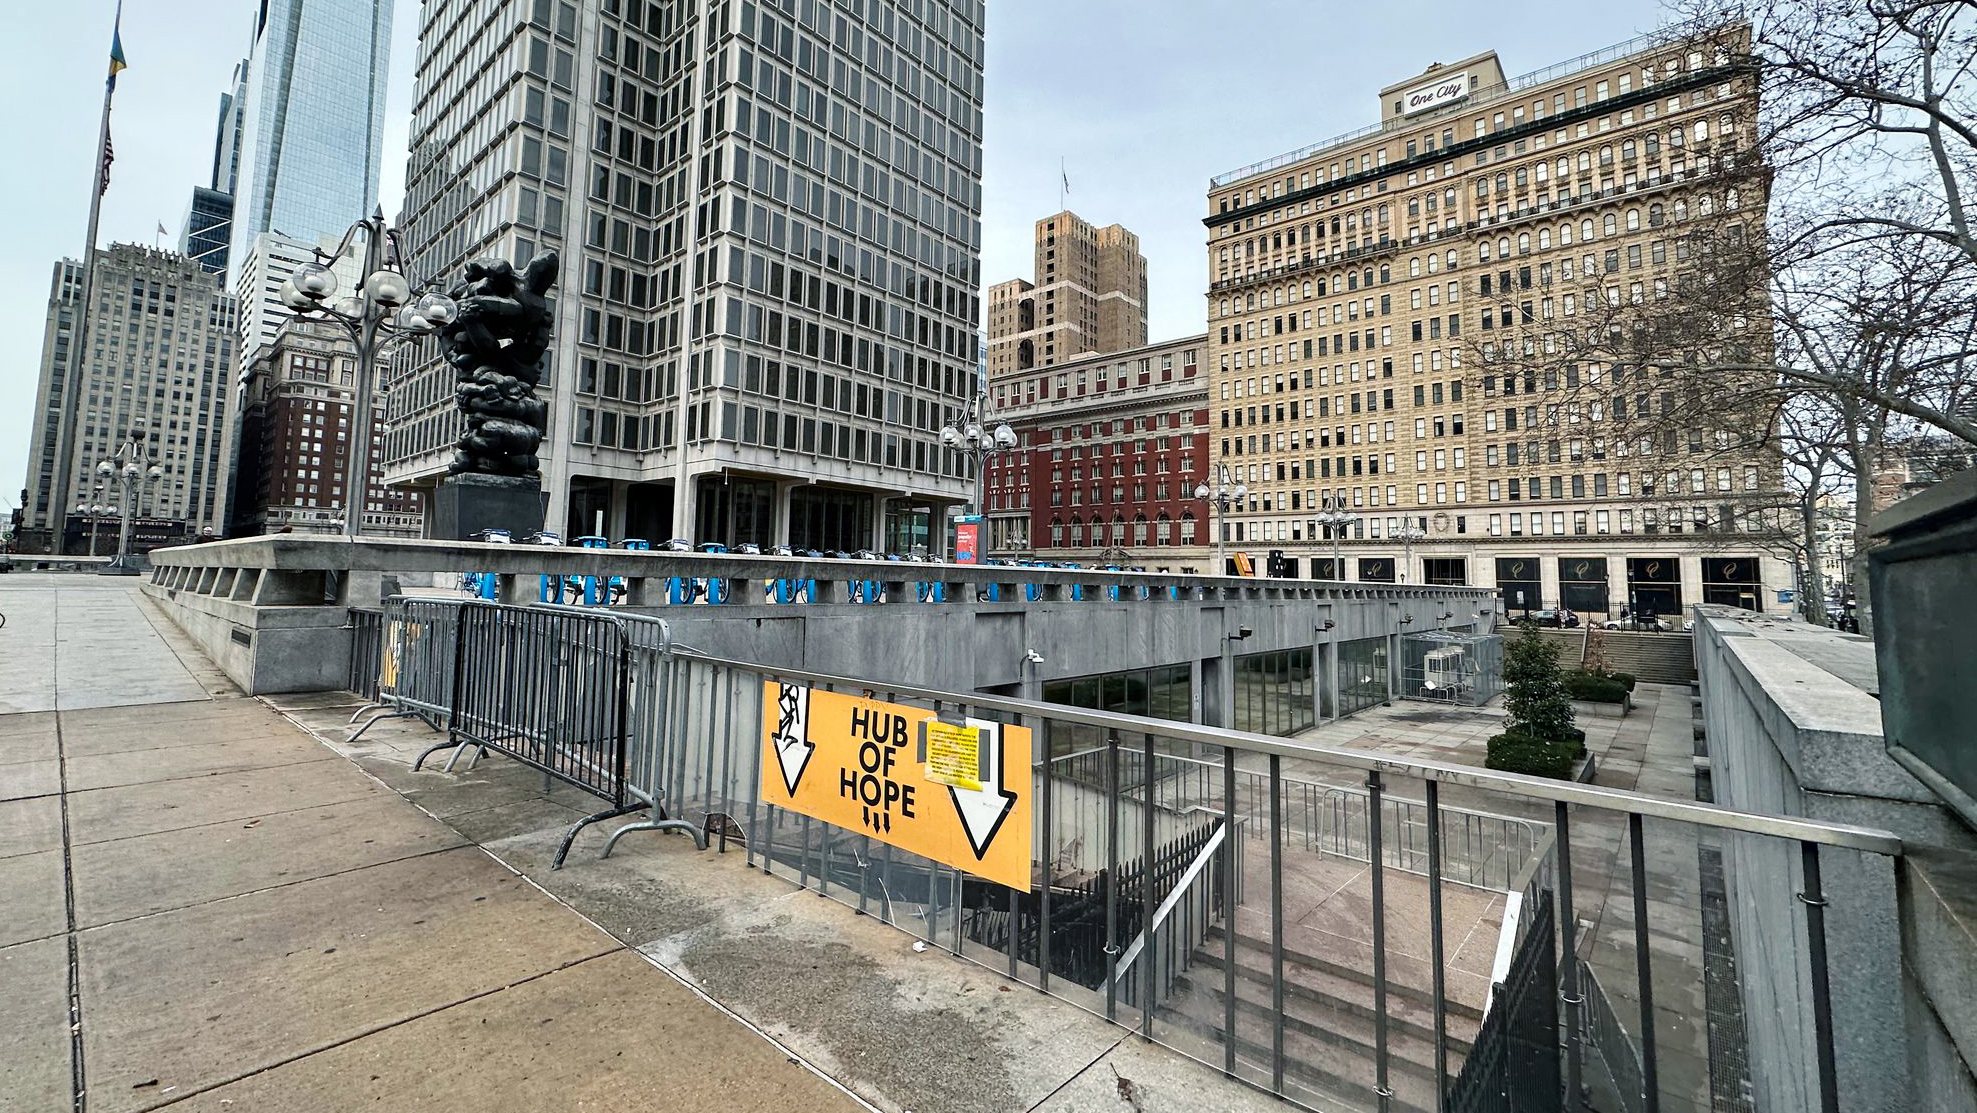 A yellow sign with multiple downward arrows indicates that the “Hub of Hope” is down steps to a former subway station below the downtown streets. A large glass skyscraper and other tall buildings are in the background against a clear but gray sky. 